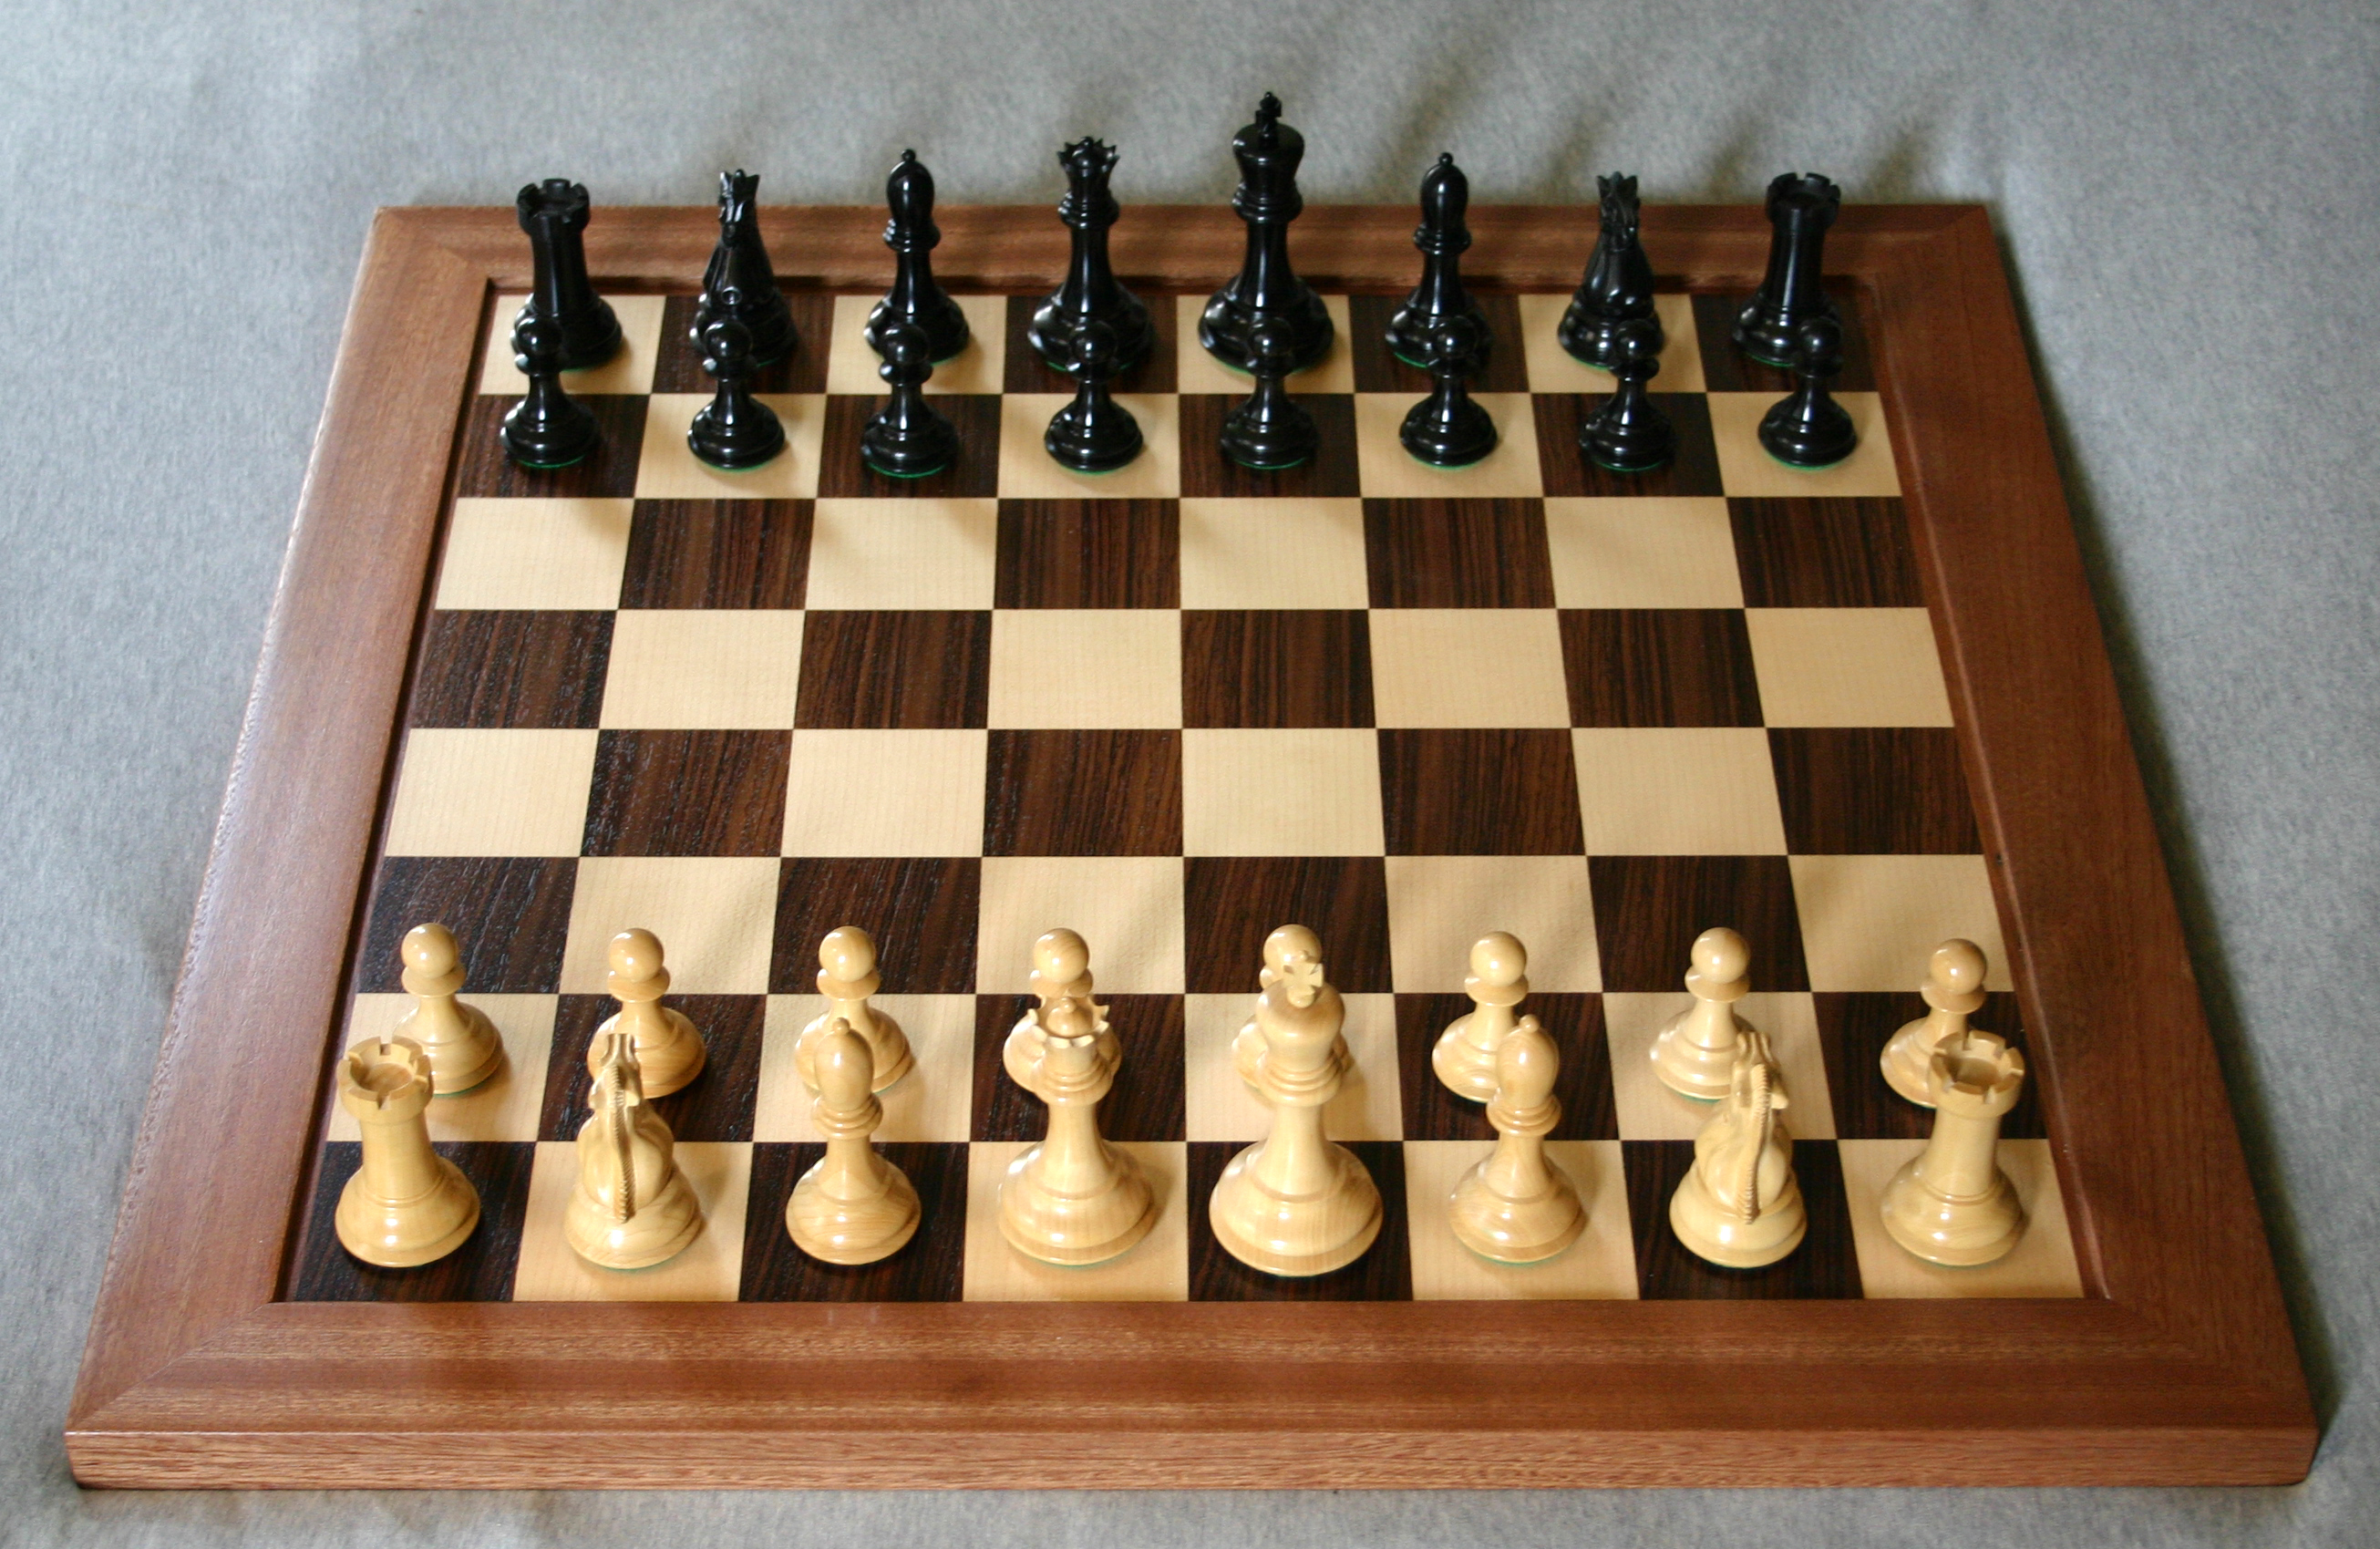 name of the chess pieces